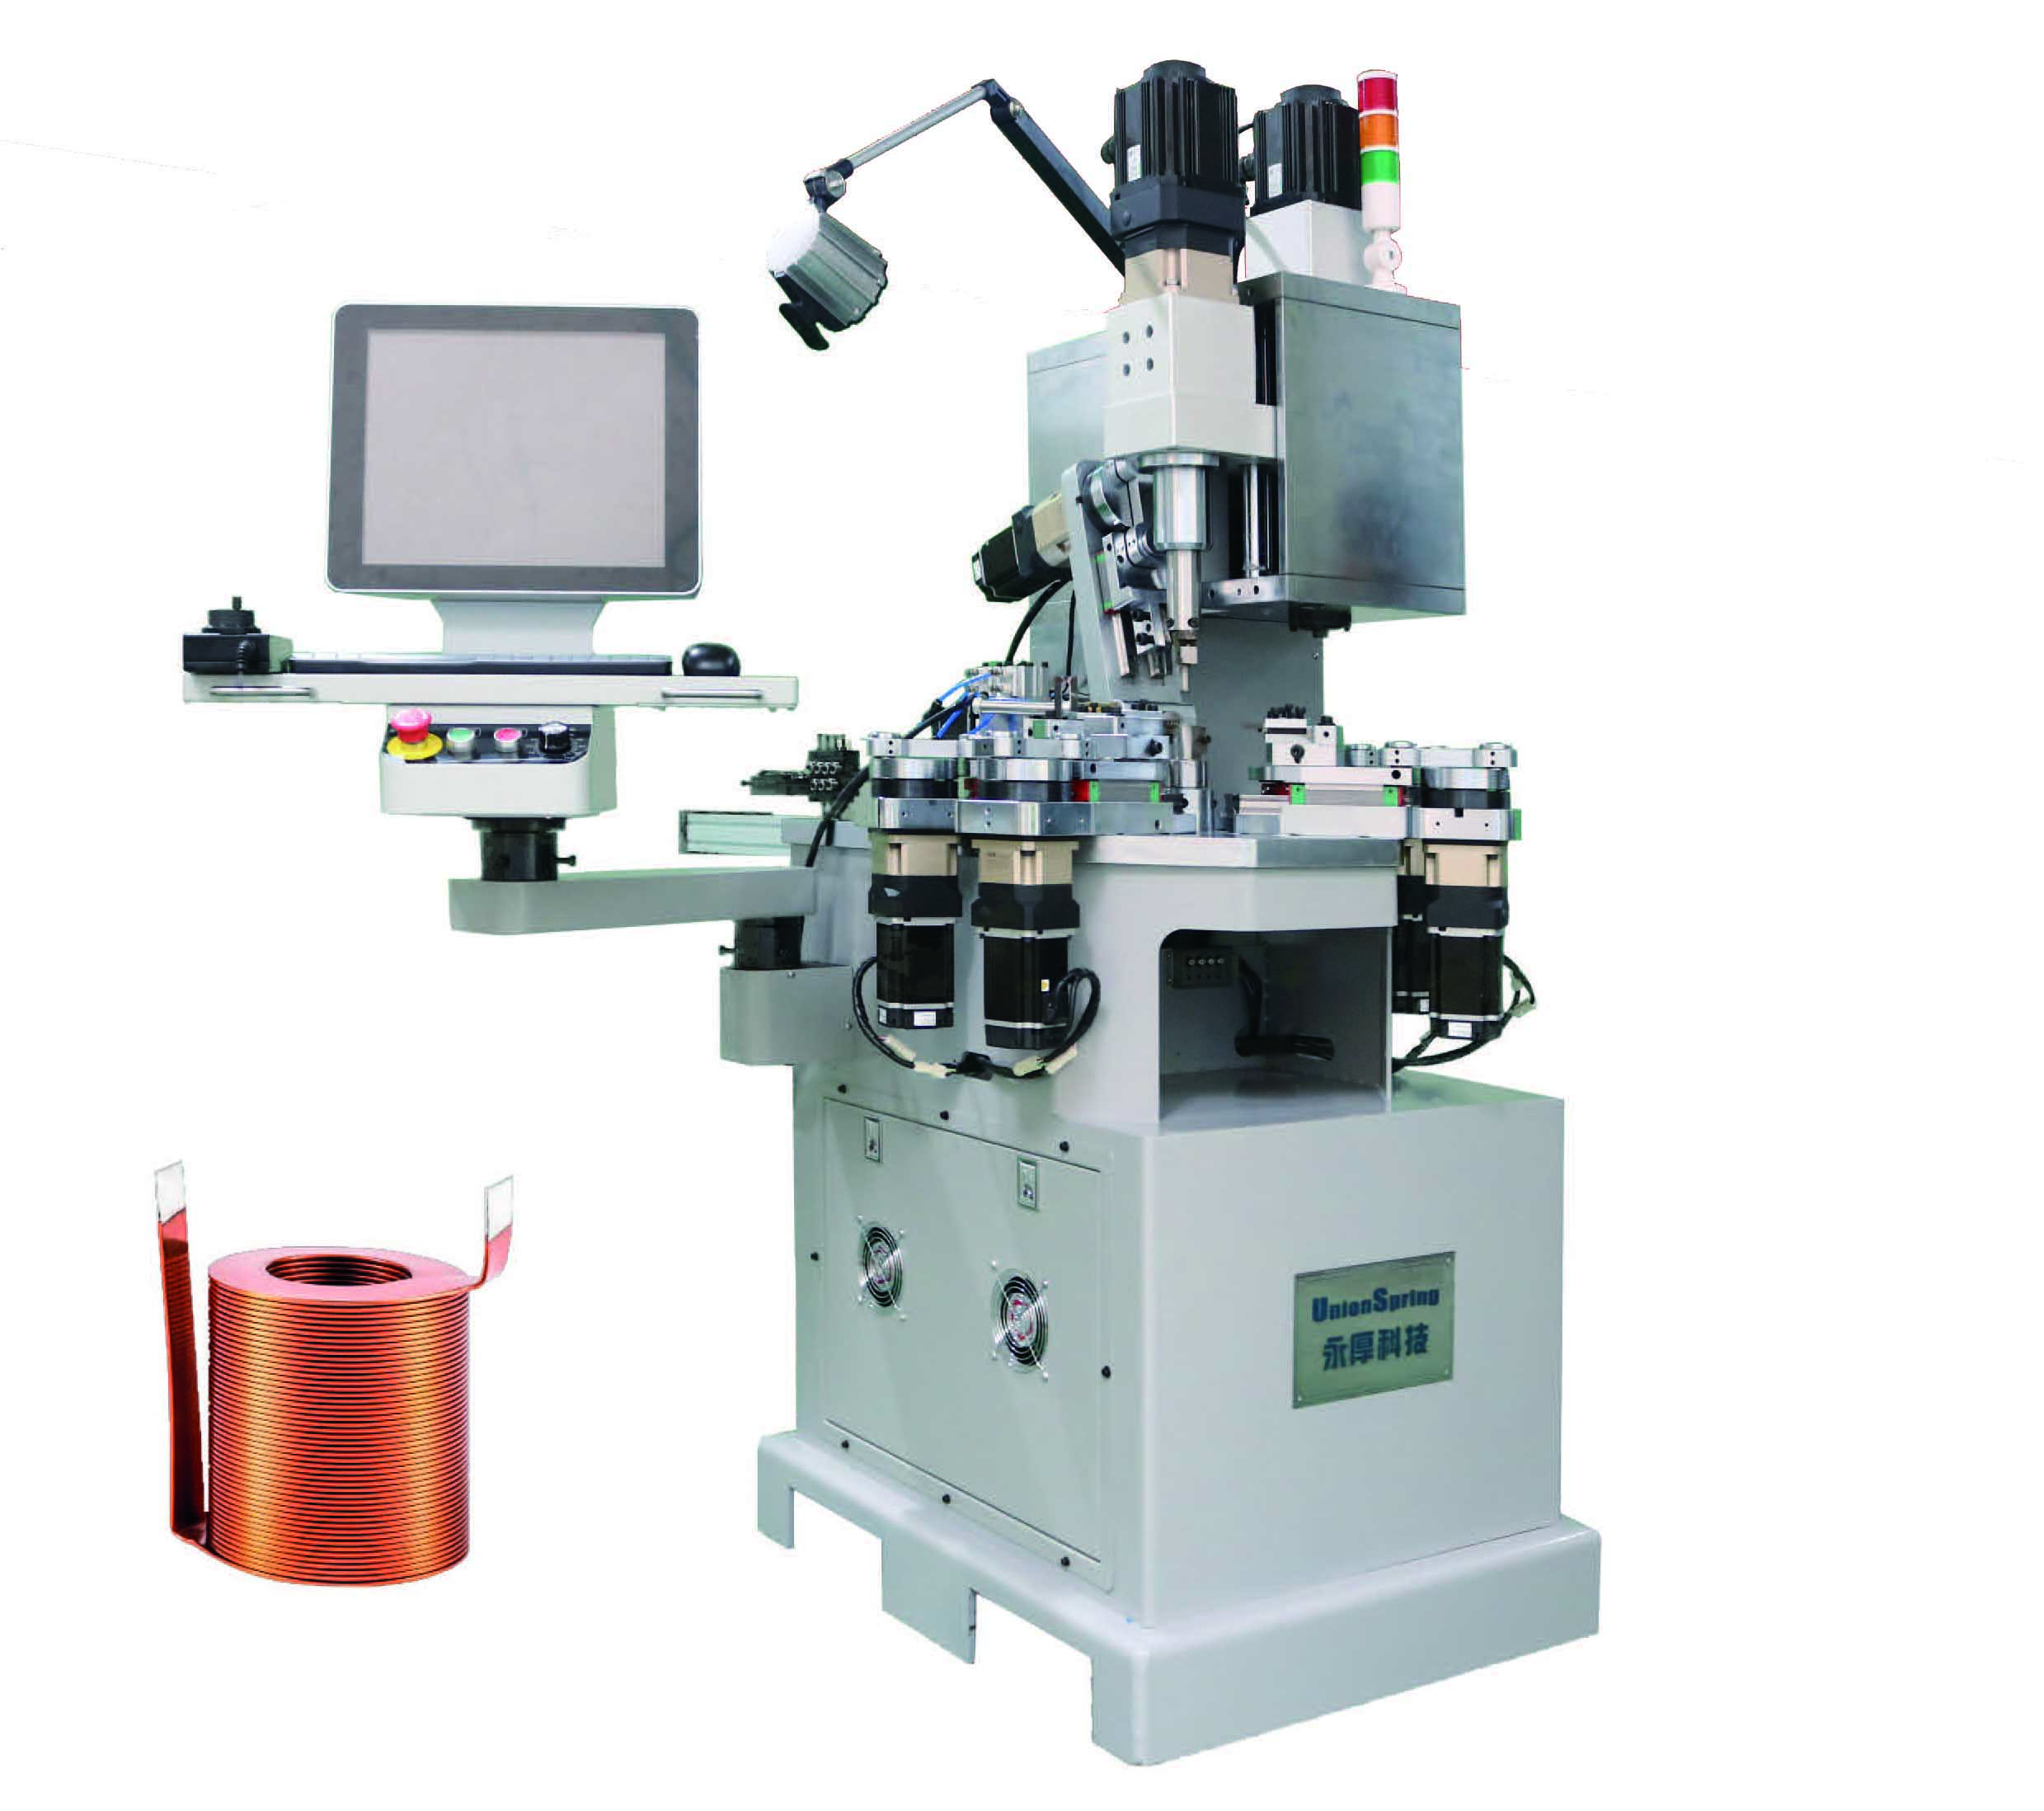 Transformer copper coil winding machine electrical equipment manufacturing machinery for copper coil winding US-850